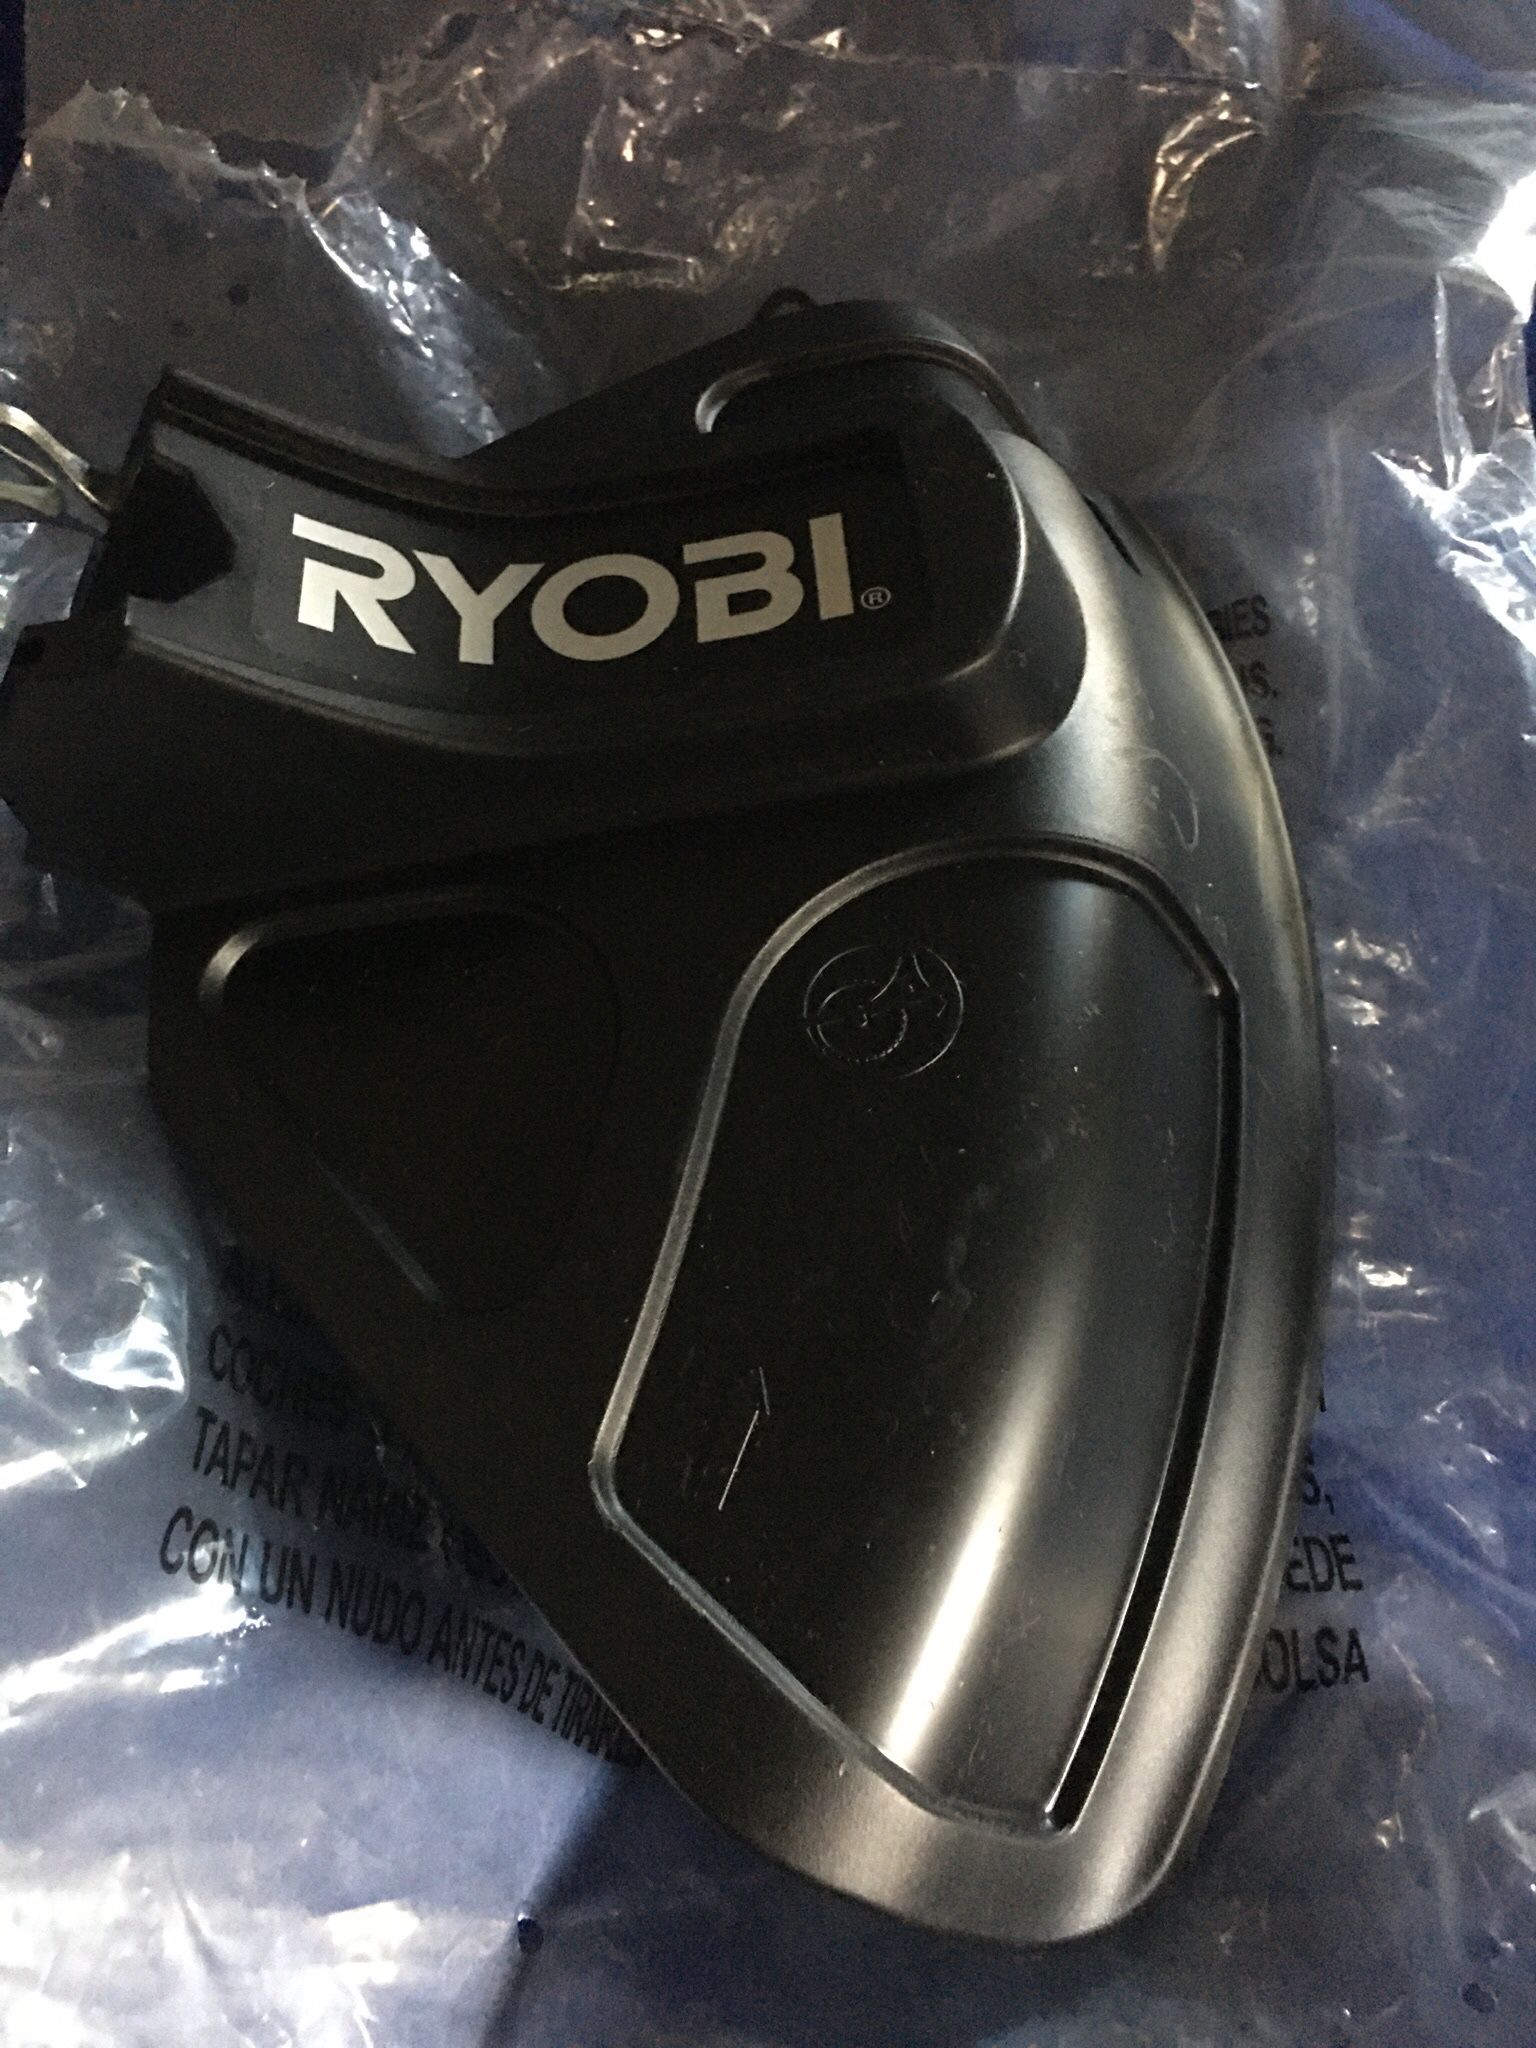 BRAND NEW NEVER USED RYOBI TRIMMER HEAD GUARD AND SHIELD $15.00